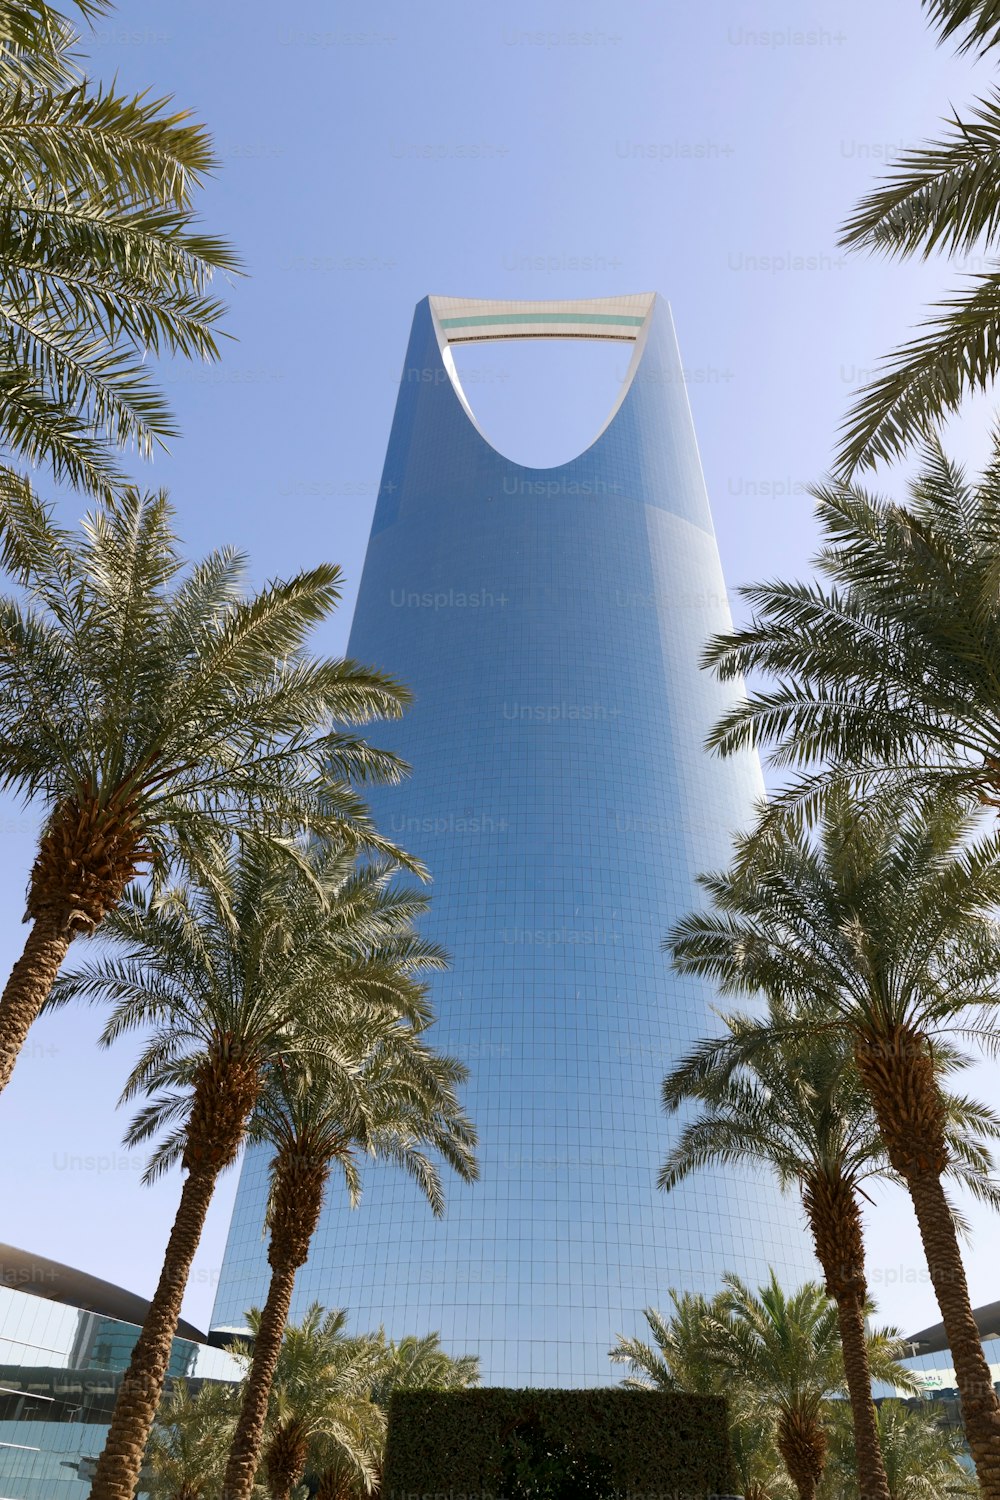 Kingdom tower in Riyadh, Saudi Arabia. Kingdom tower is a business and convention center, shopping mall and one of the main landmarks of Riyadh city